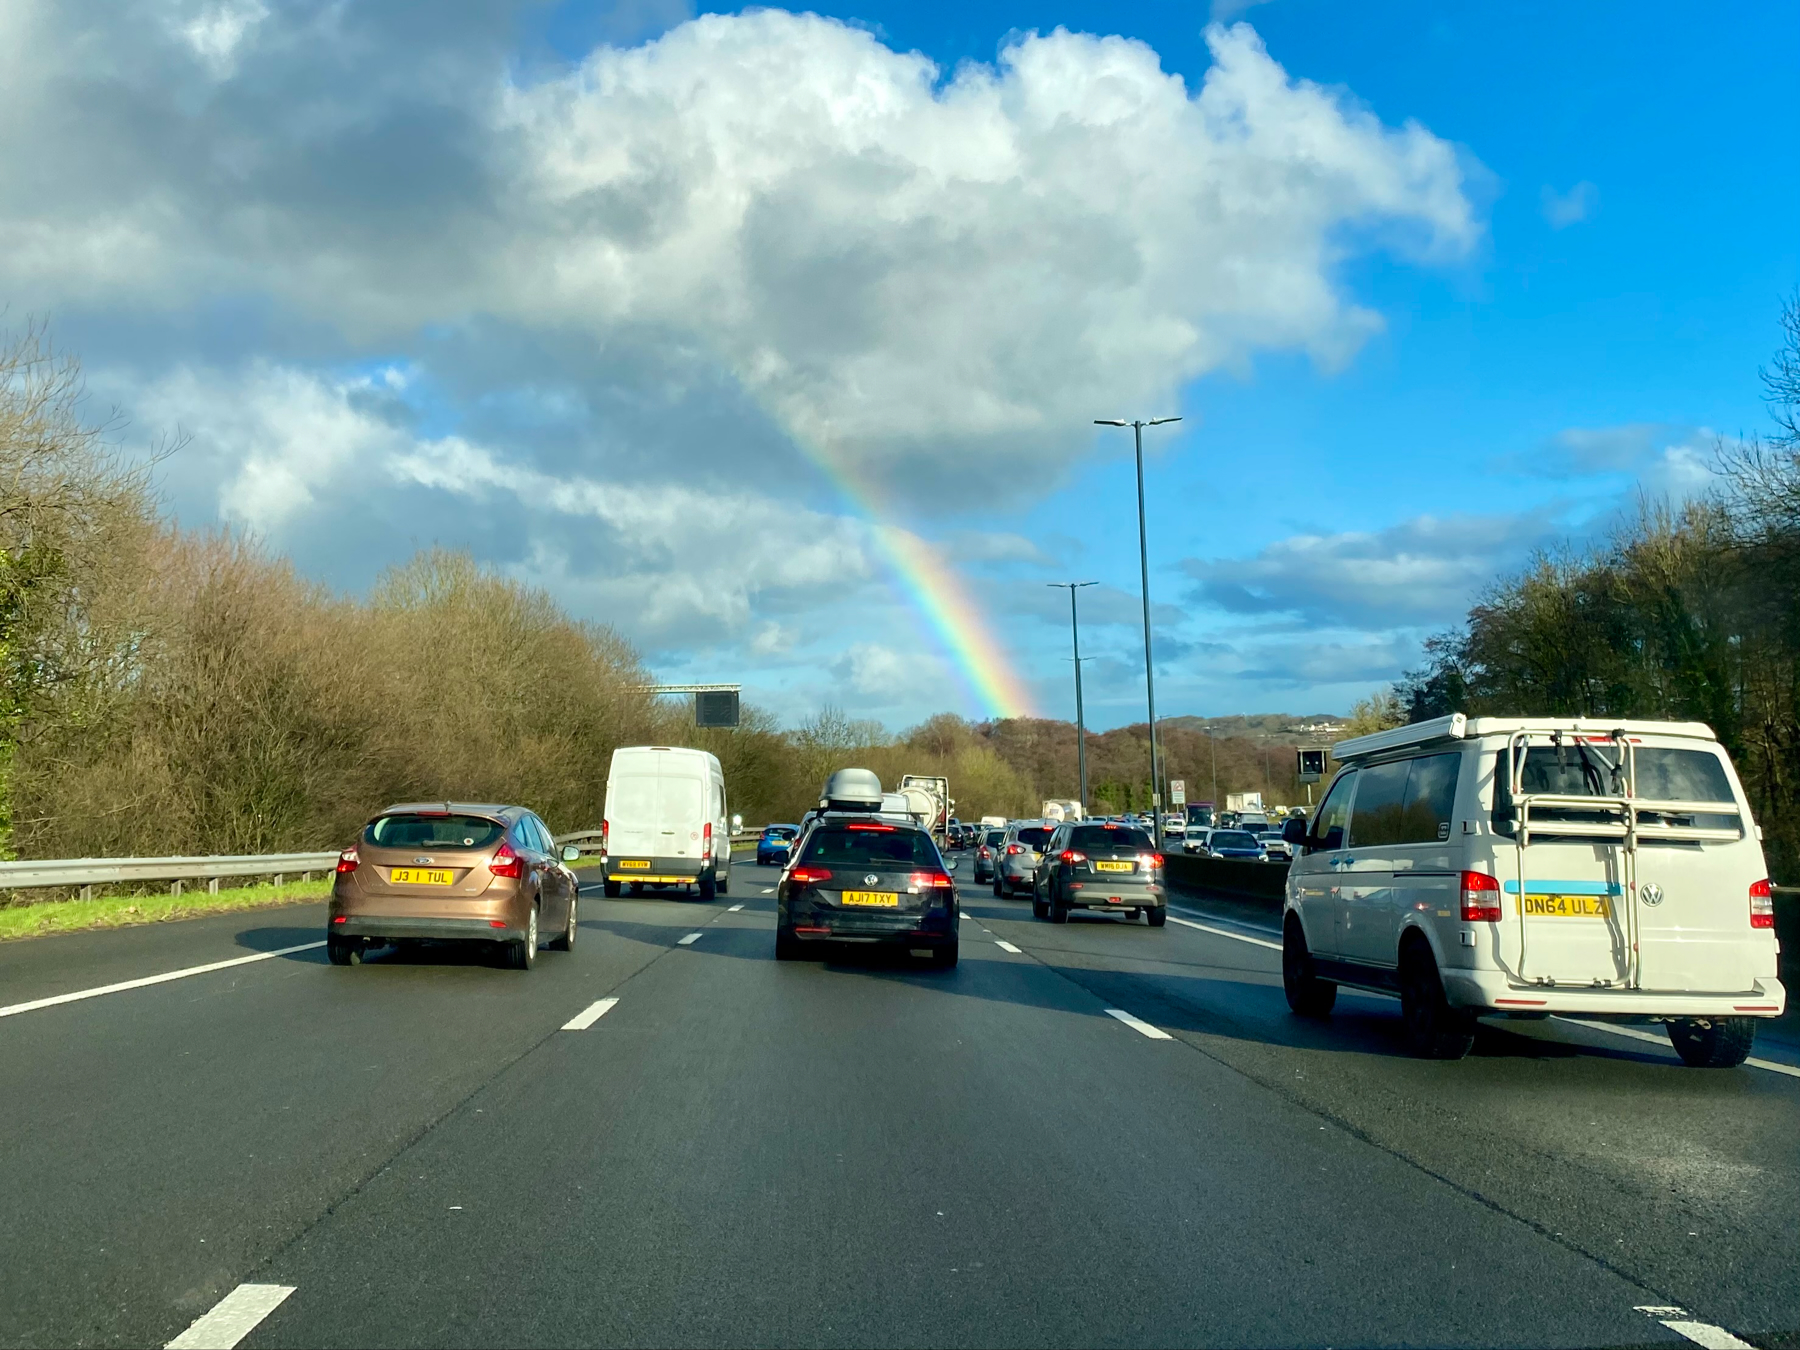 Motorway with queues of traffic but a rainbow in the sky